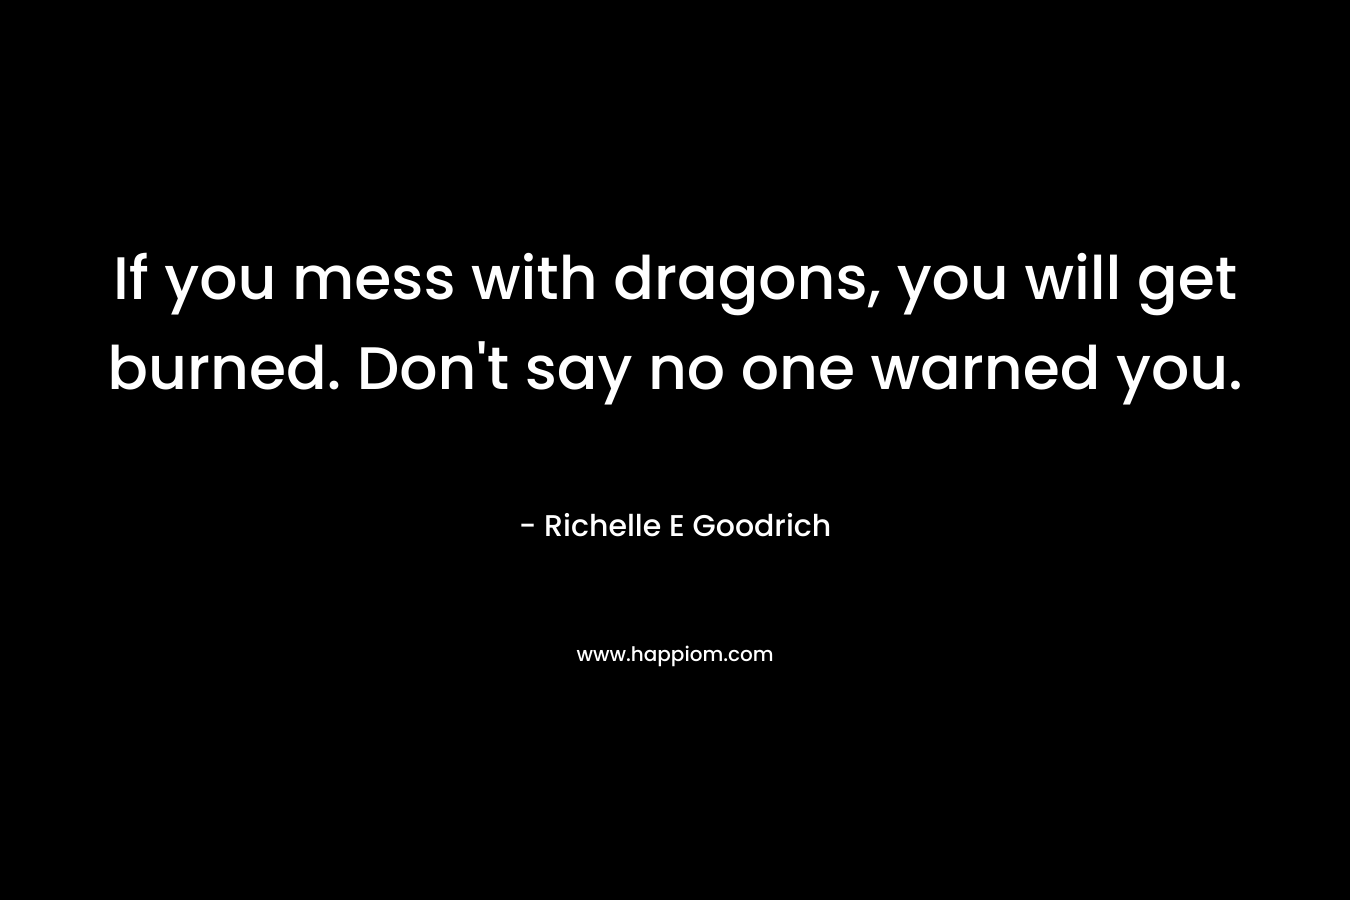 If you mess with dragons, you will get burned. Don’t say no one warned you. – Richelle E Goodrich